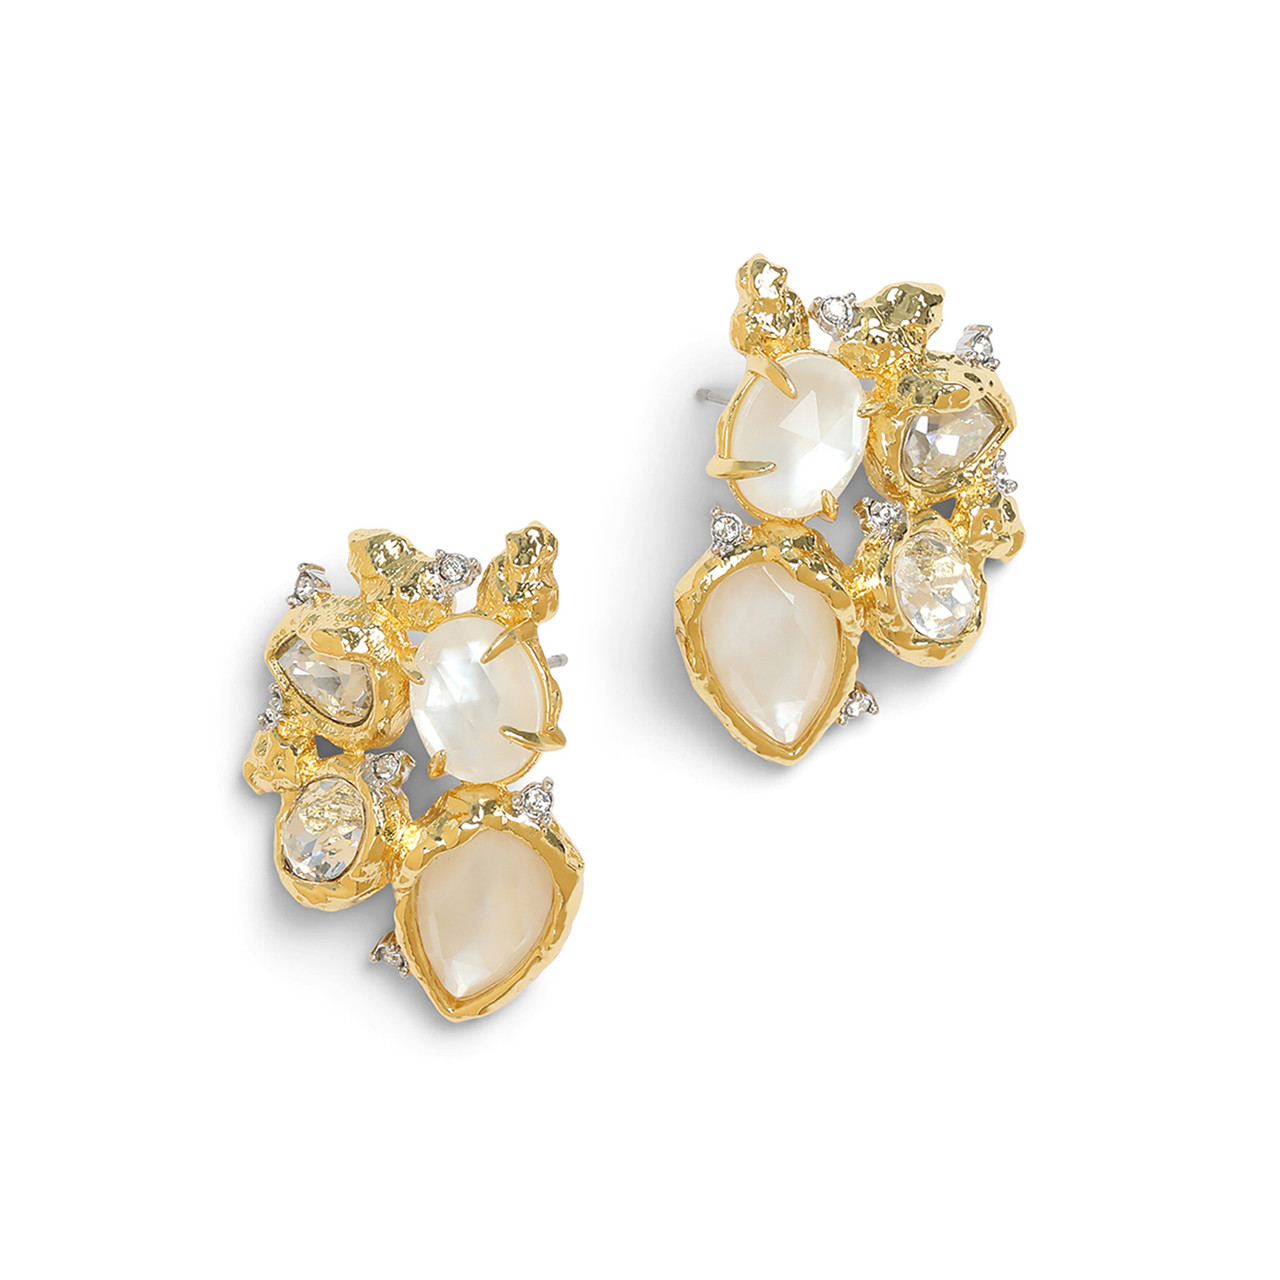 Golden Pebble Cake Cluster Earrings with Mother of Pearl, Alexis Bittar, tomfoolery